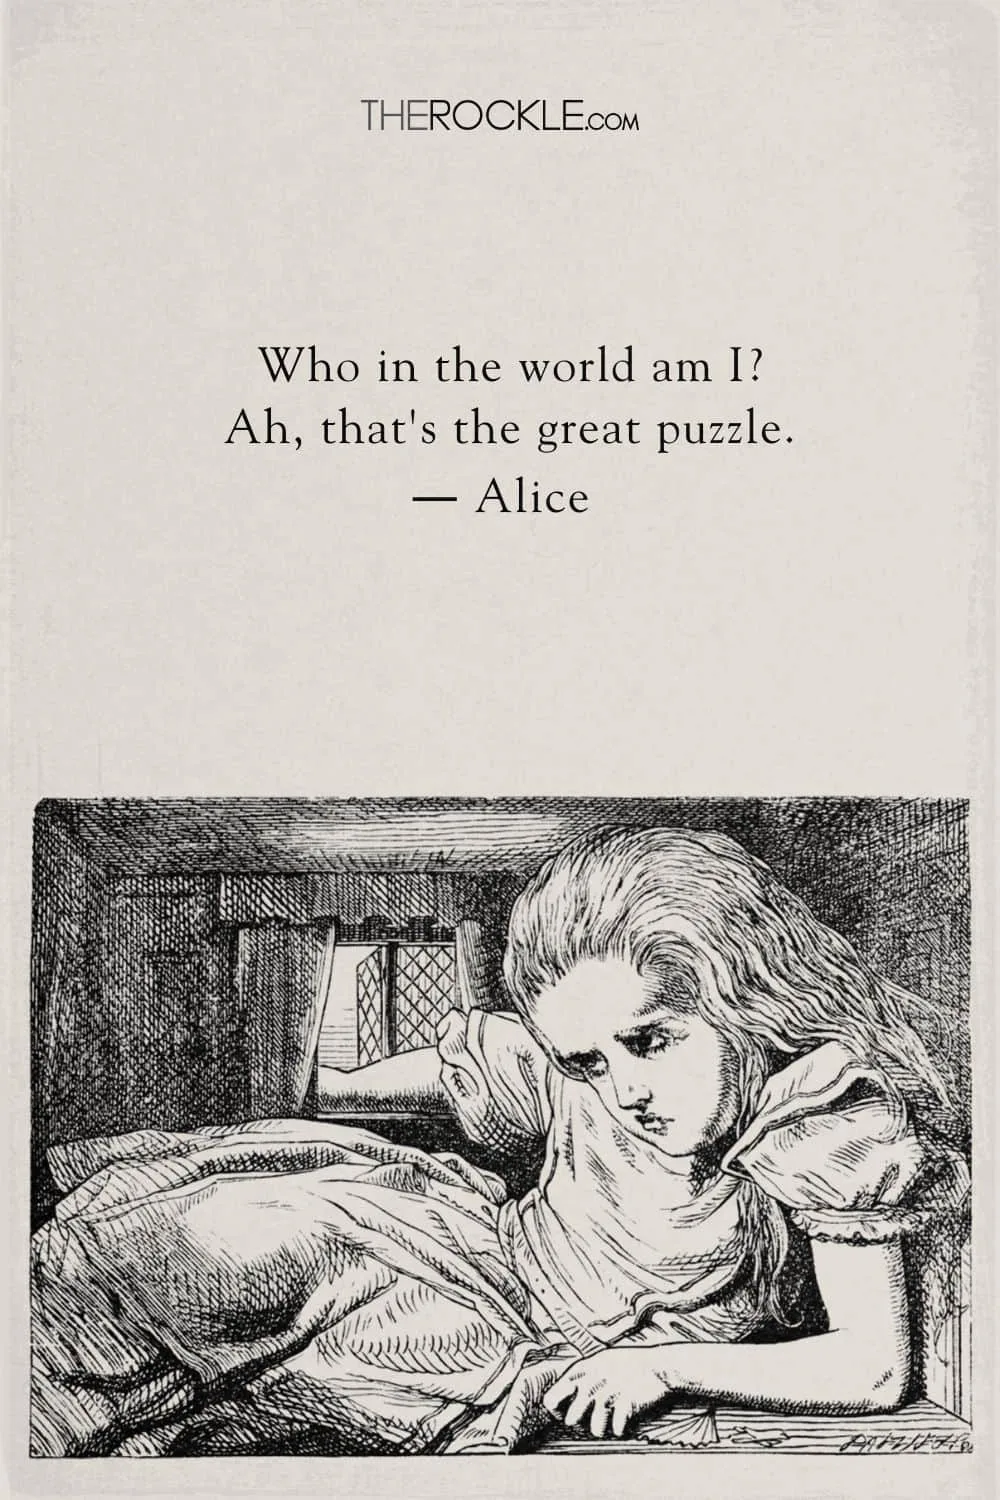 Alice in Wonderland quote on identity and confusion